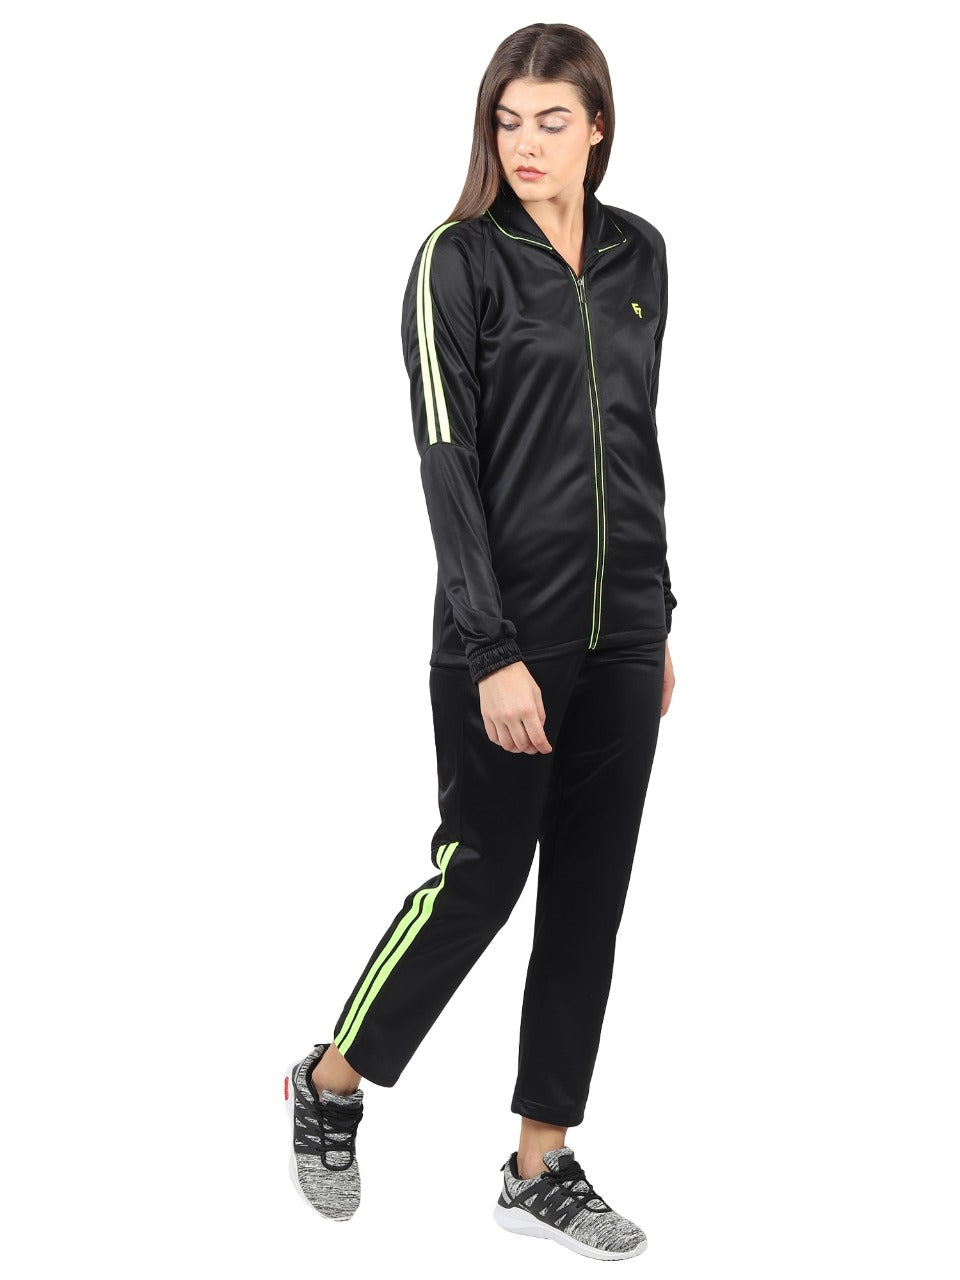 Casual Full Sleeve Track Suit for Girls and Women's